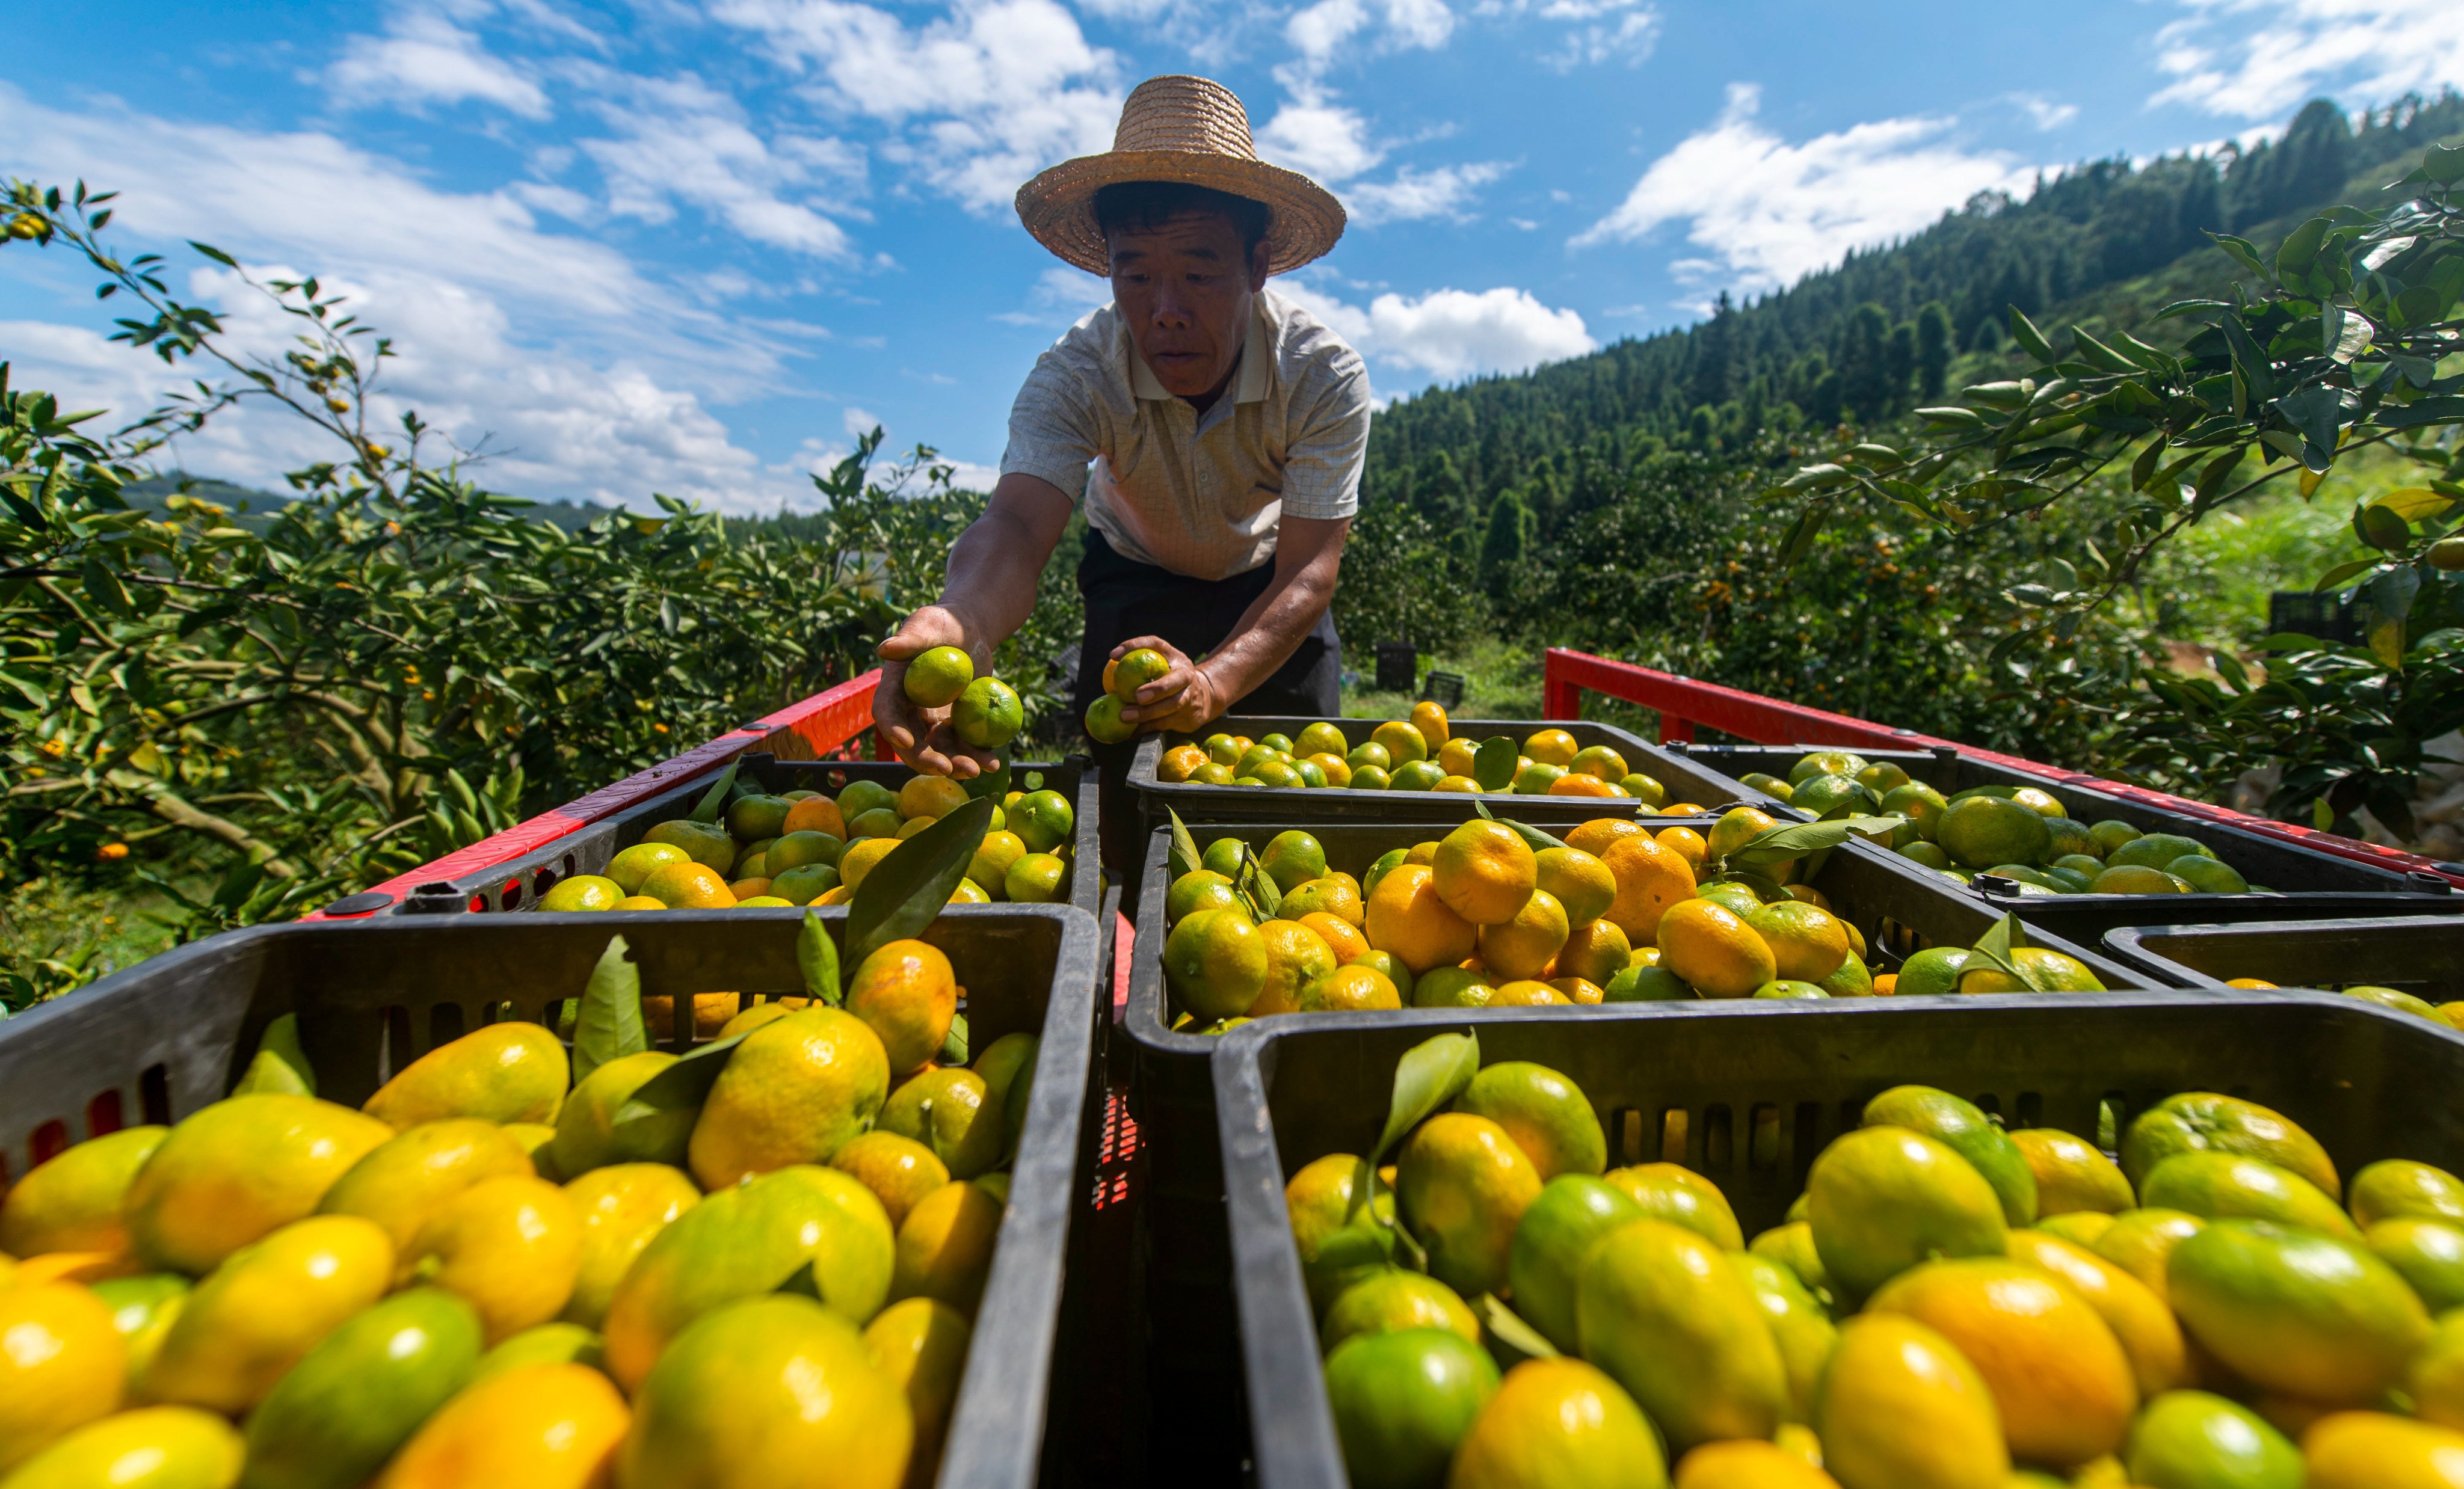 The origin and birthplace of citrus have long been a matter of debate, but a group of Chinese researchers say the roots of the family tree belong in China. Photo: Xinhua 